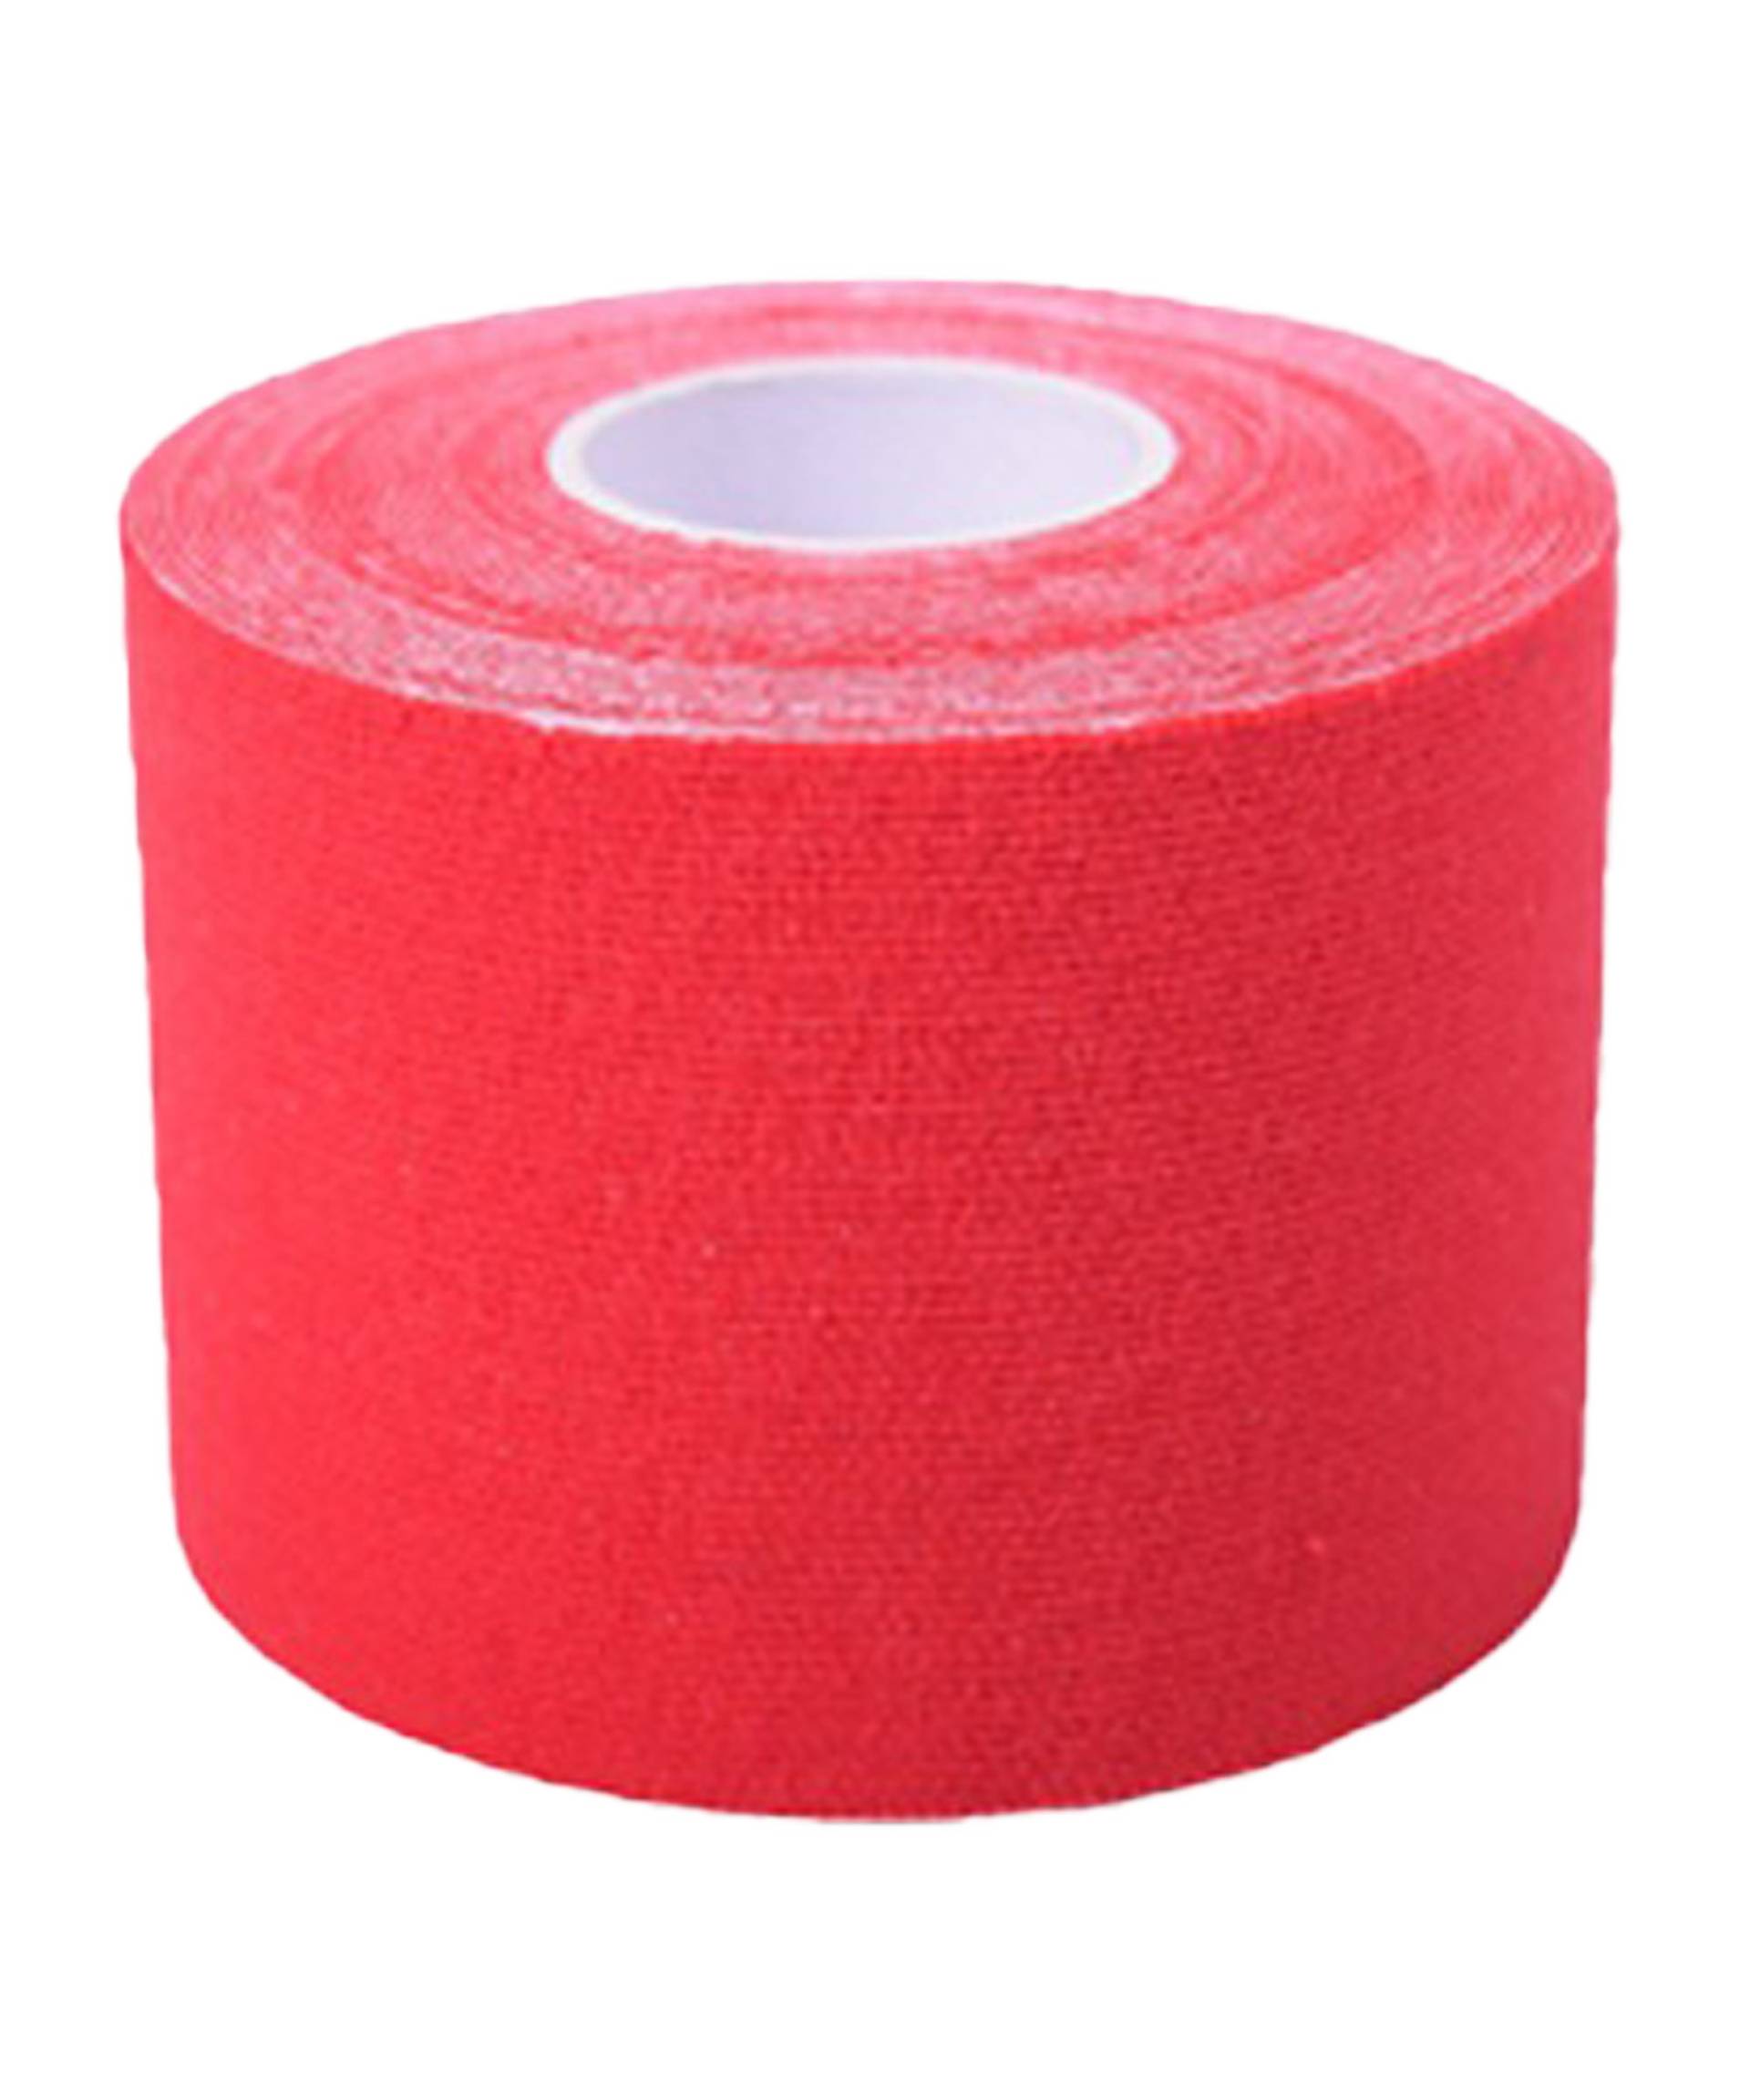 Cawila Kinesiology Tape 5,0cm x 5m Rot von cawila